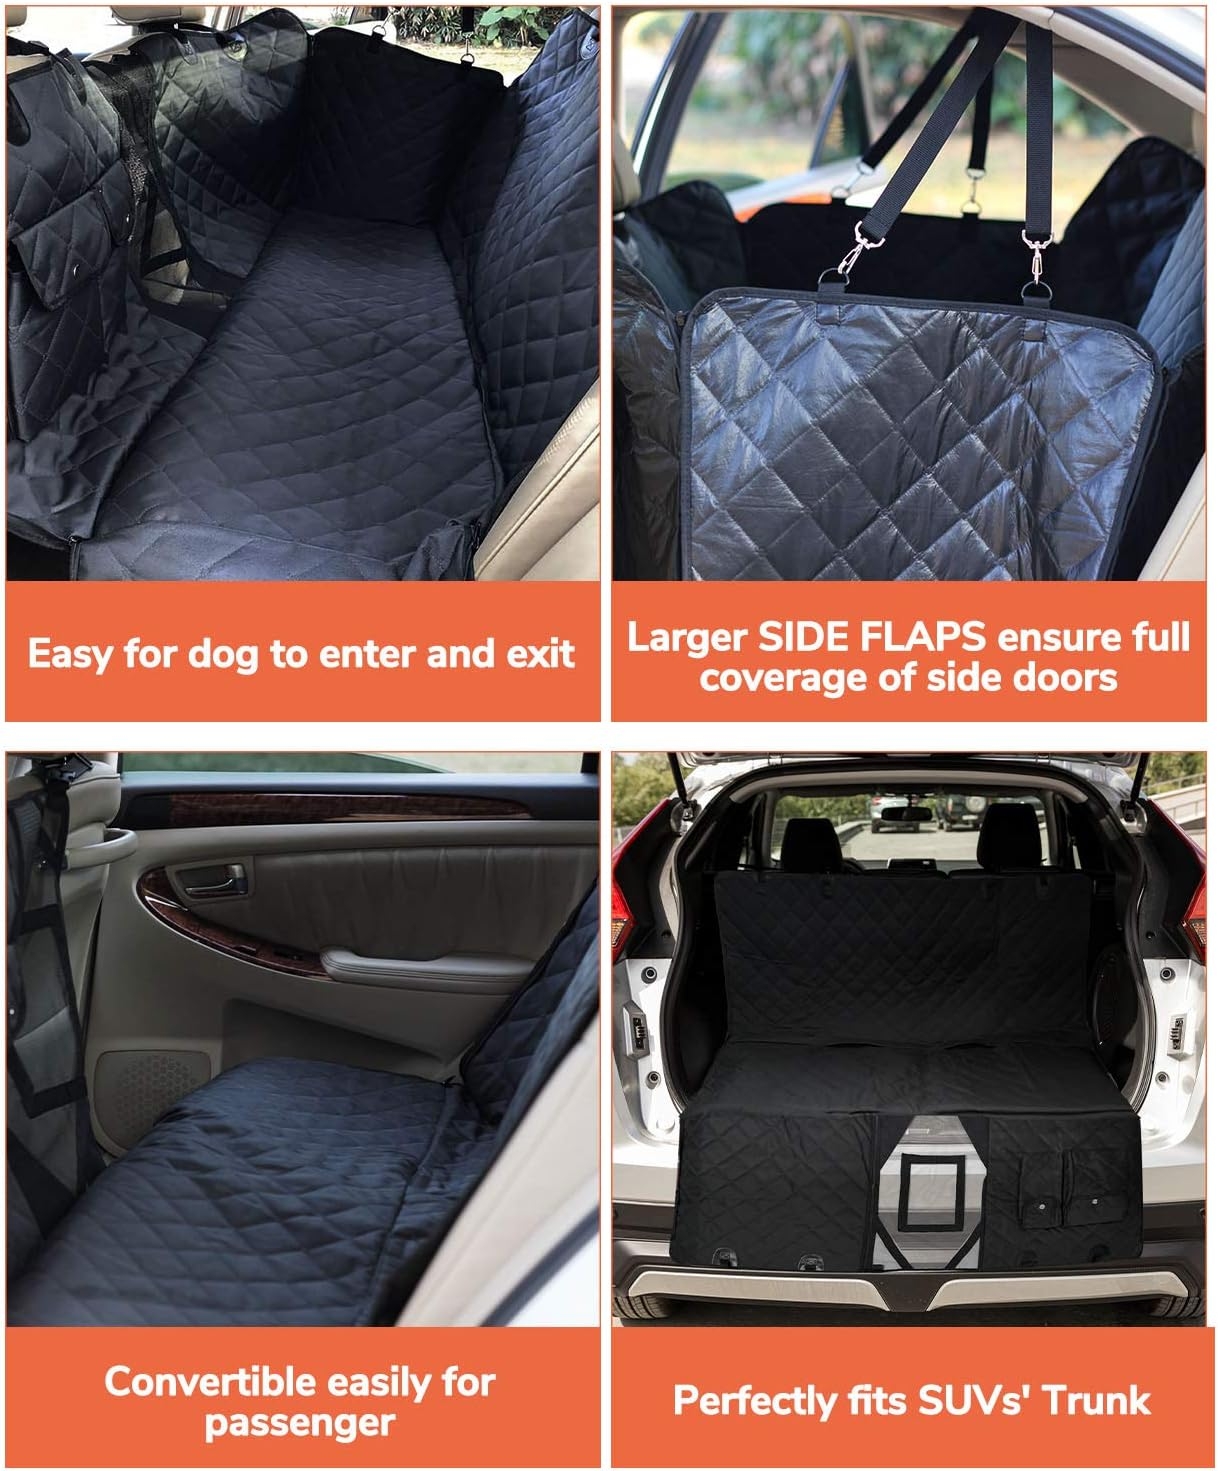 LumoLeaf Dog Car Seat Cover Protector, Nonslip Waterproof Hammock Backseat Cover with Visible Mesh & Storage Pocket, Durable Scratchproof Seat Protection Against Dirt Pet Fur for Cars SUVs Trucks.